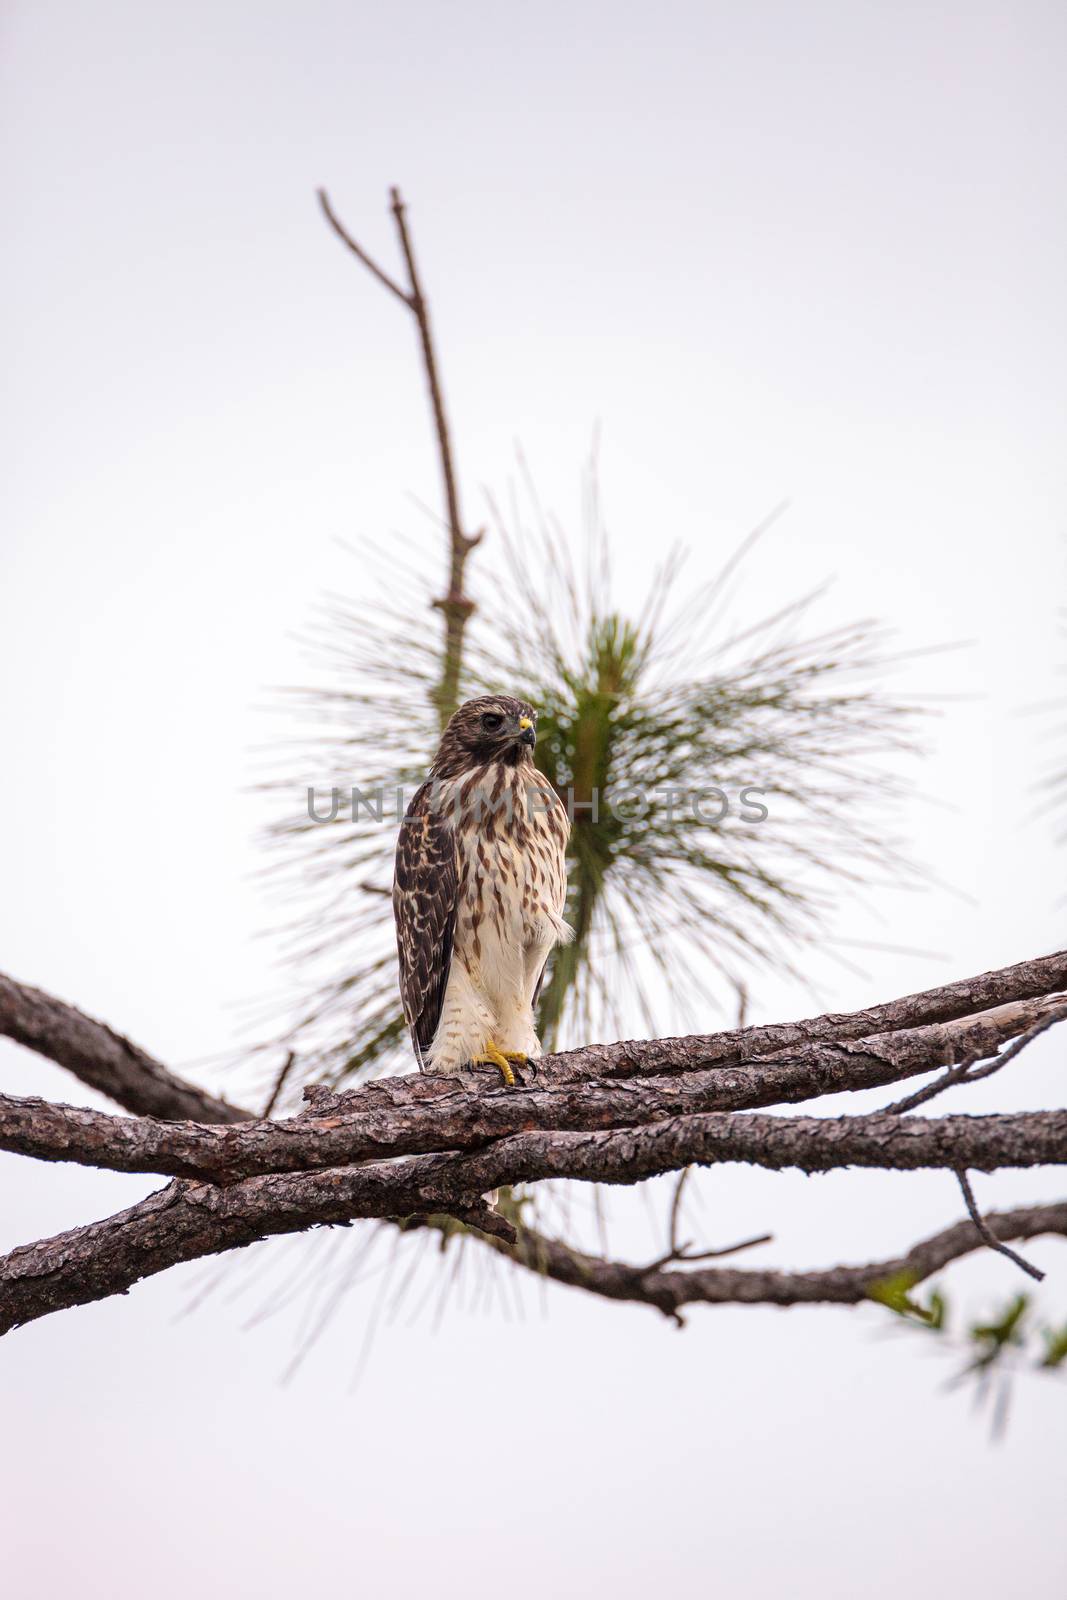 Red shouldered Hawk Buteo lineatus by steffstarr